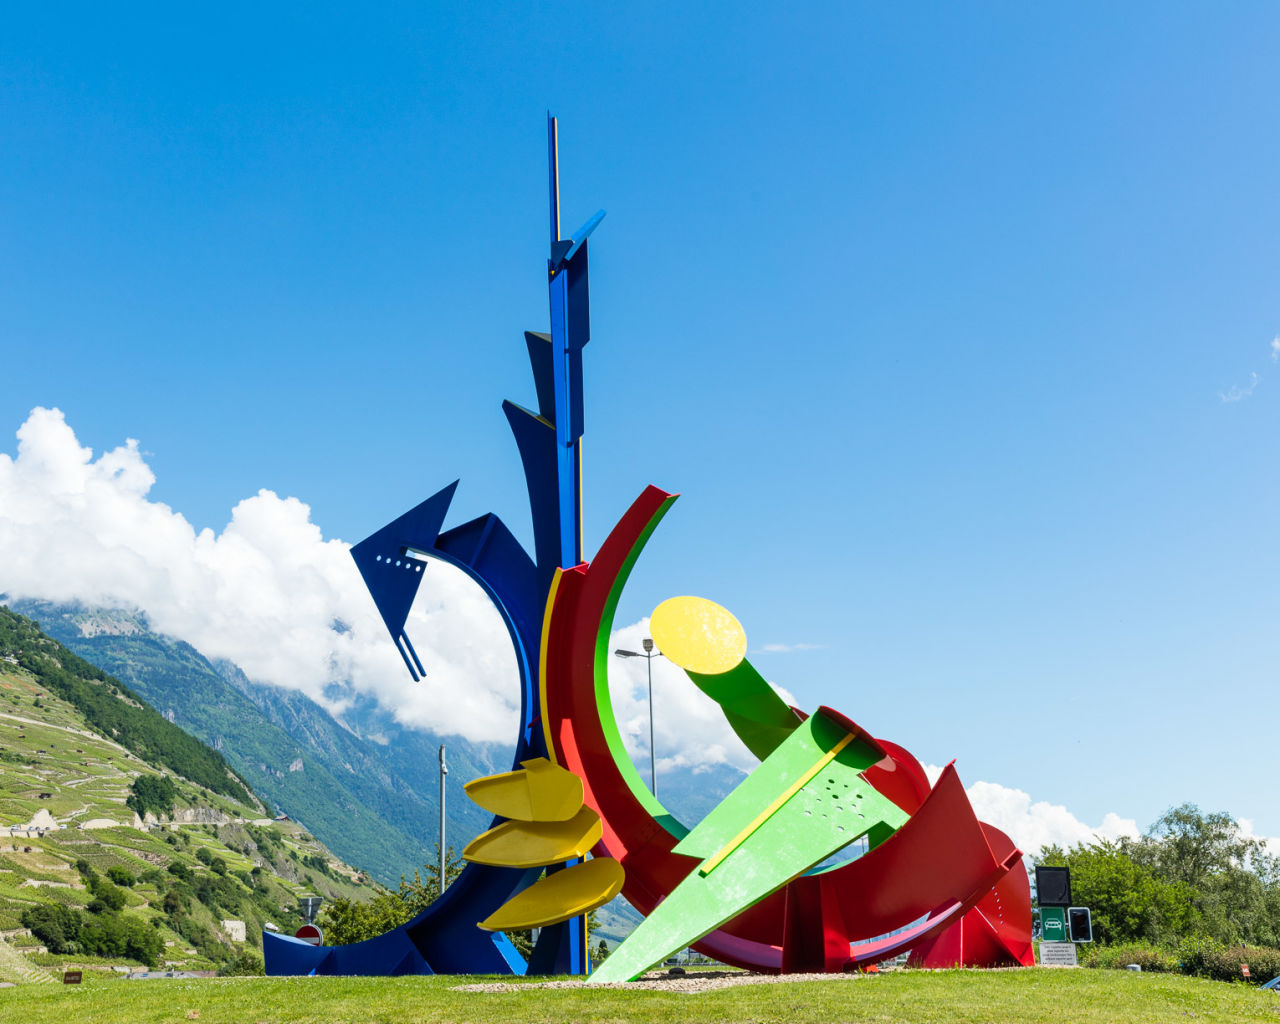 Discover on foot or by car the sculptures and works of art that adorn 17 roundabouts in the town of Martigny, Valais, Switzerland